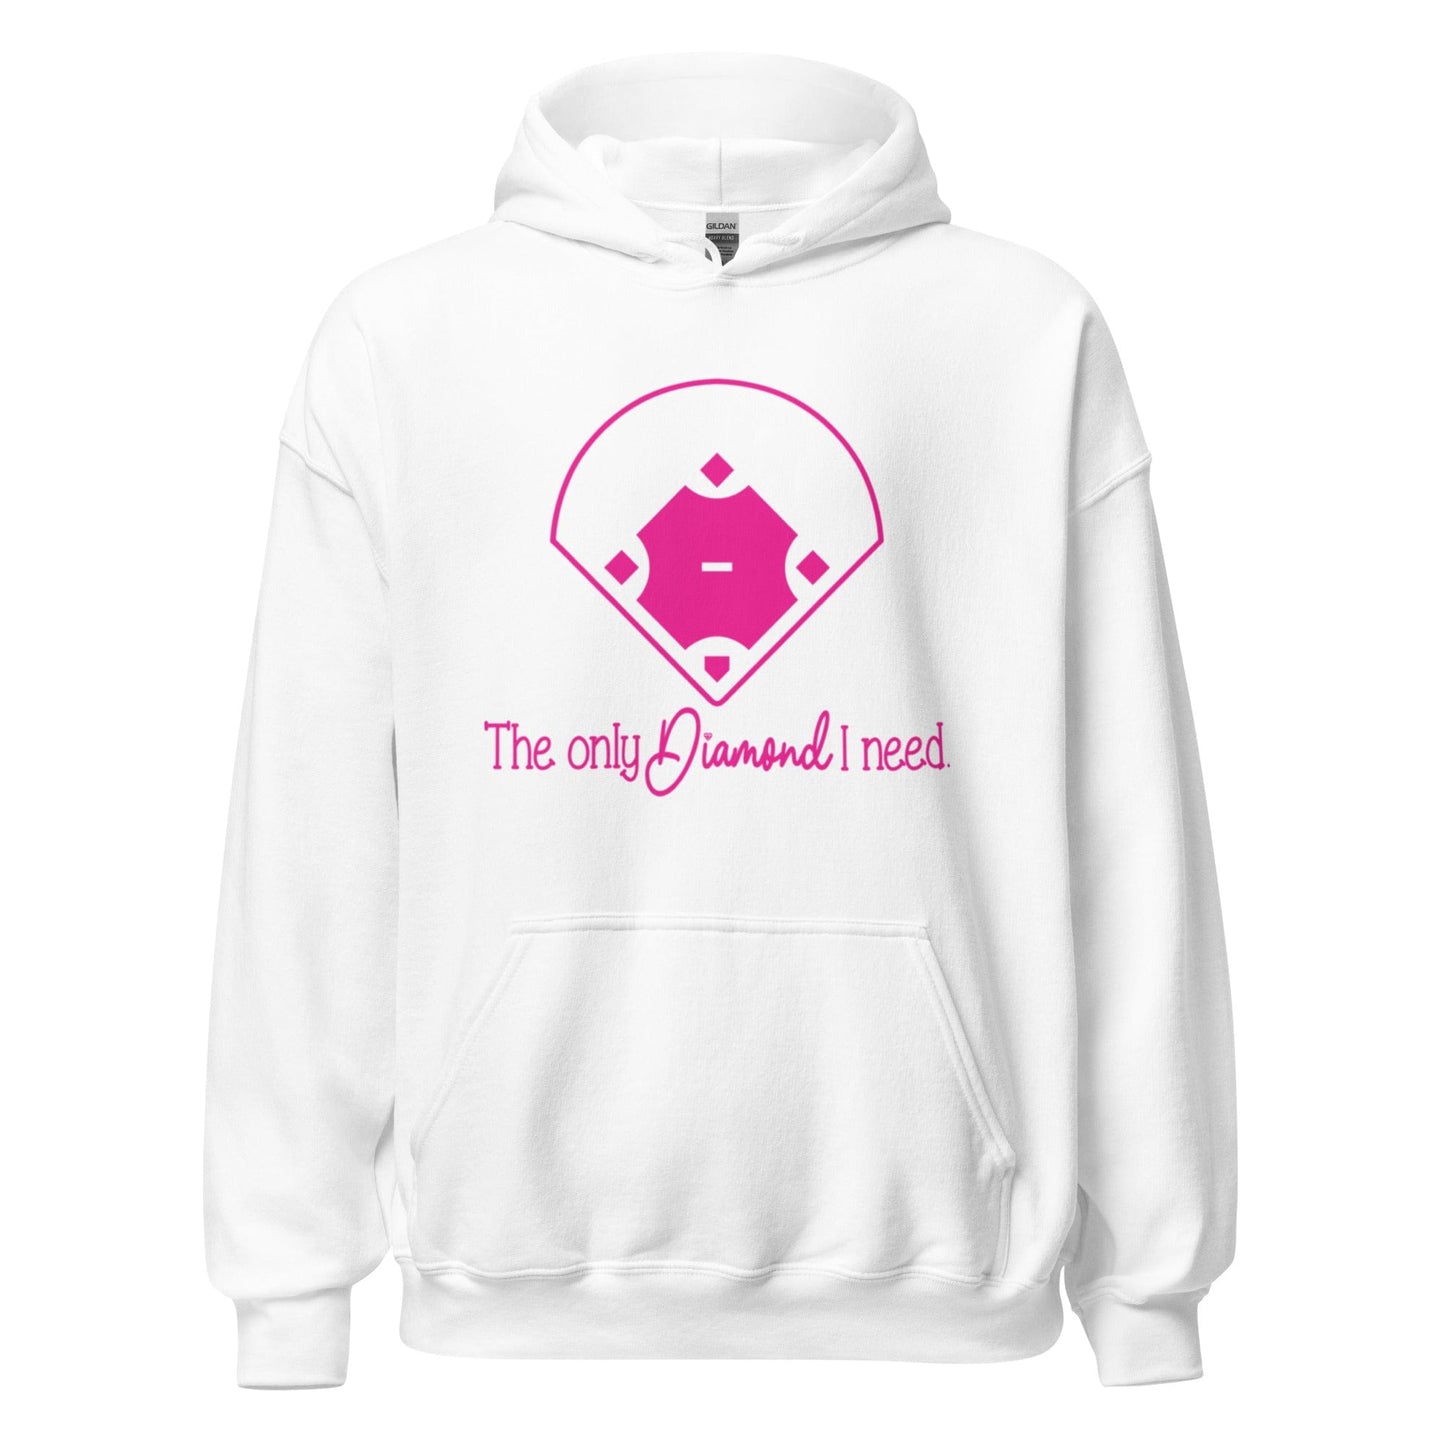 The Only Diamond I Need - Adult Hoodie